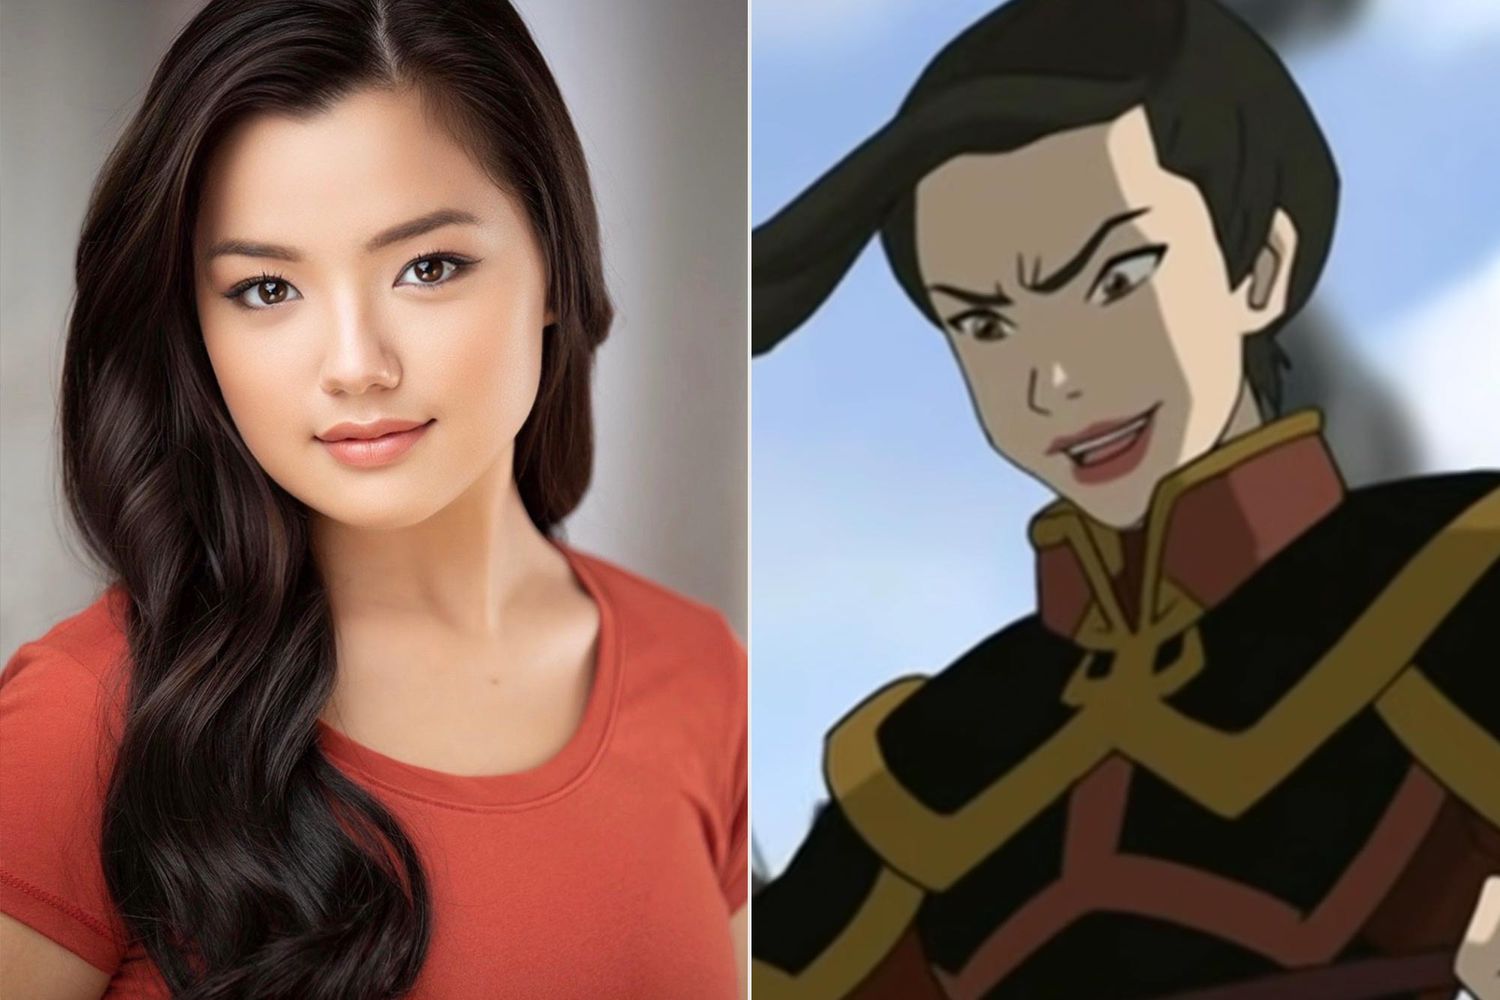 Avatar: The Last Airbender casts live-action Azula 